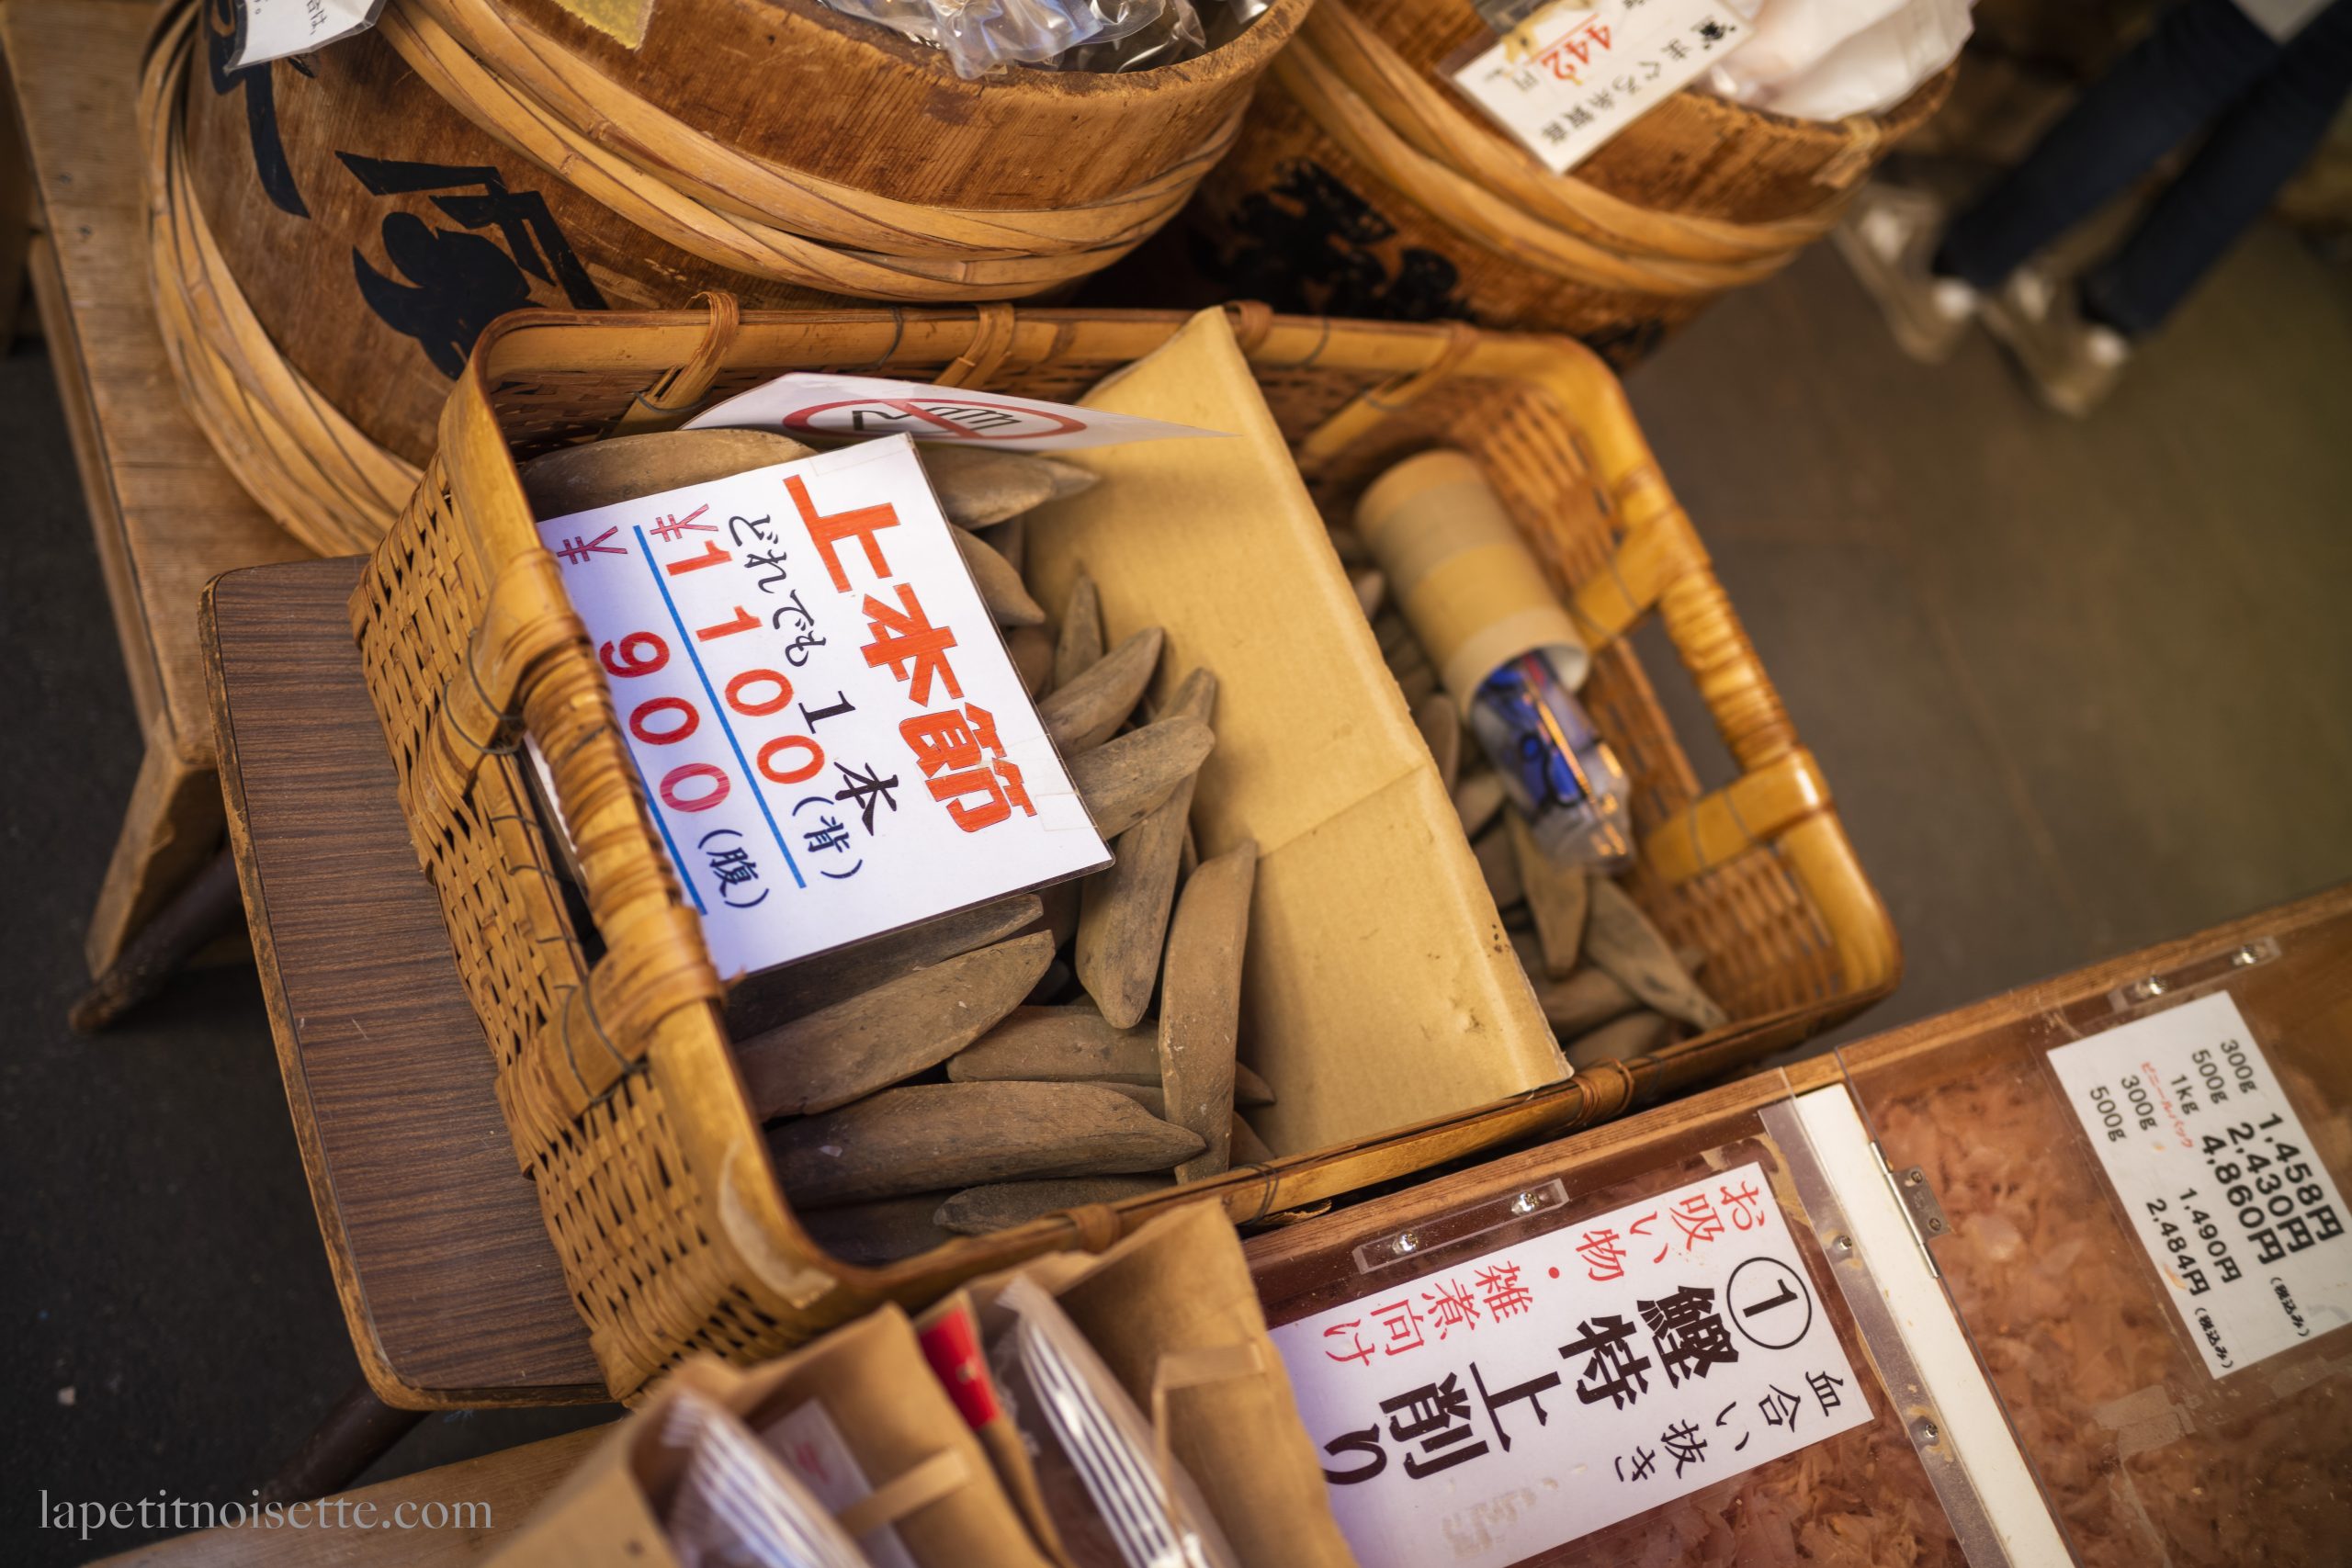 hon-katsuobushi being sold in a market in Japan.